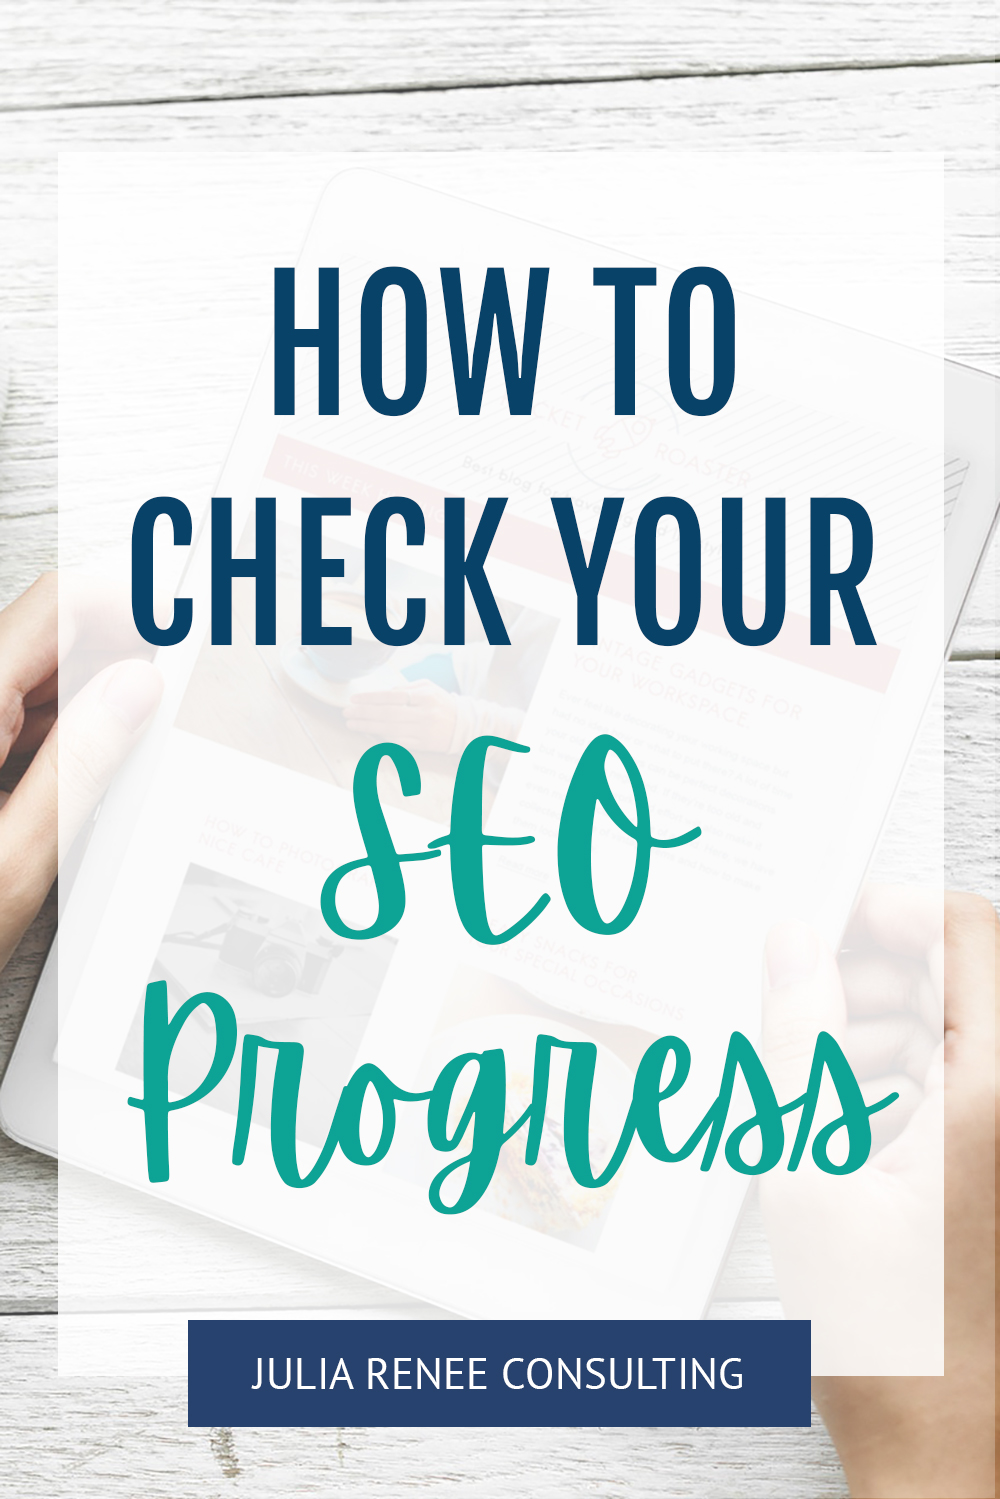 What to Check for Your SEO Progress with Monthly SEO Reporting